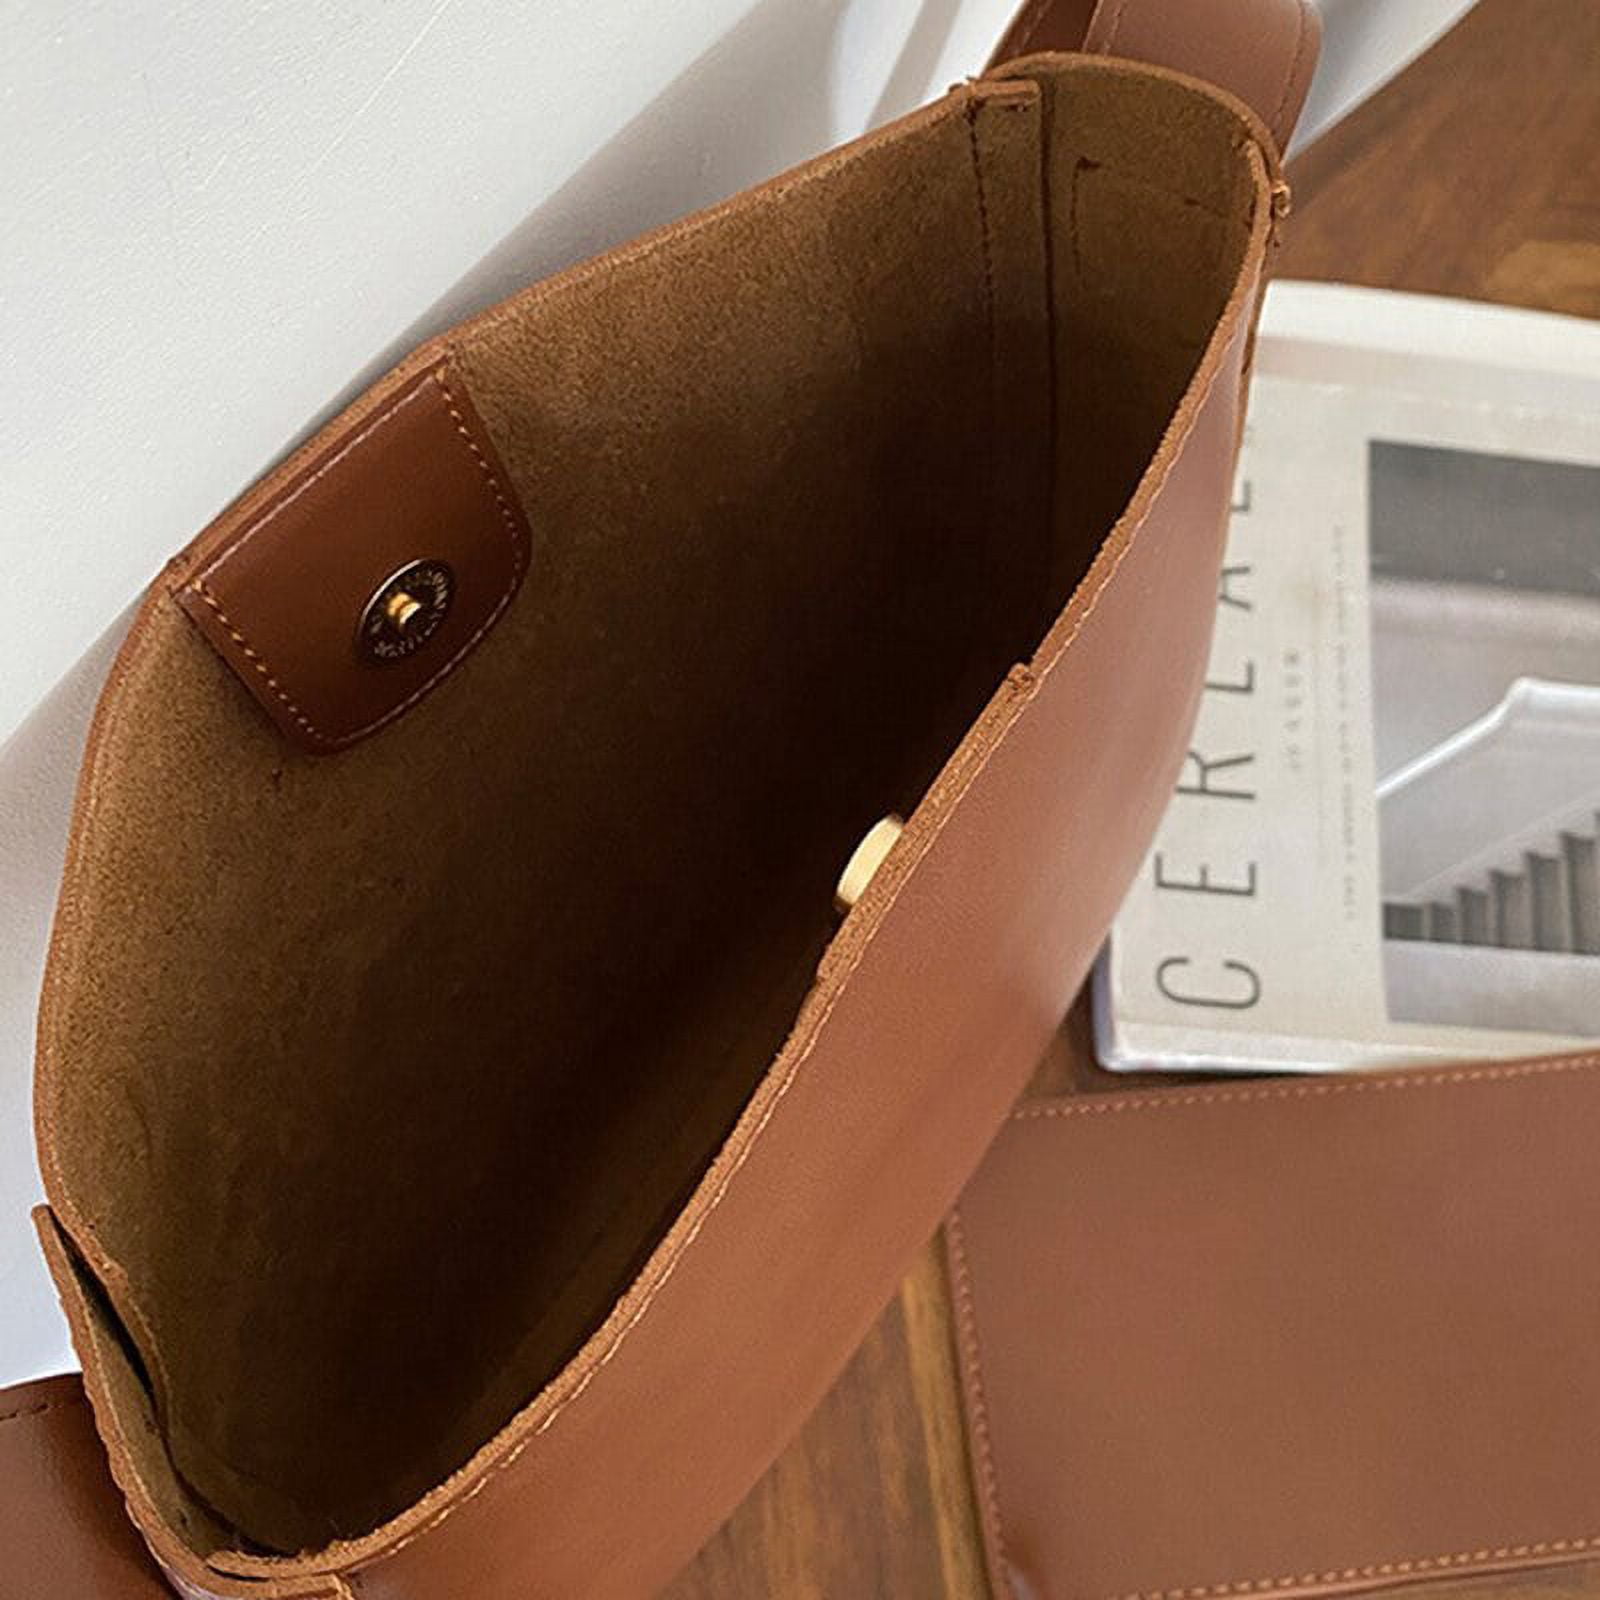 CoCopeaunts Luxury Designer Bucket Bags New Small Chain Handbags Women  Leather Shoulder Bag Lady France Famous Brand Cross Body Bag 